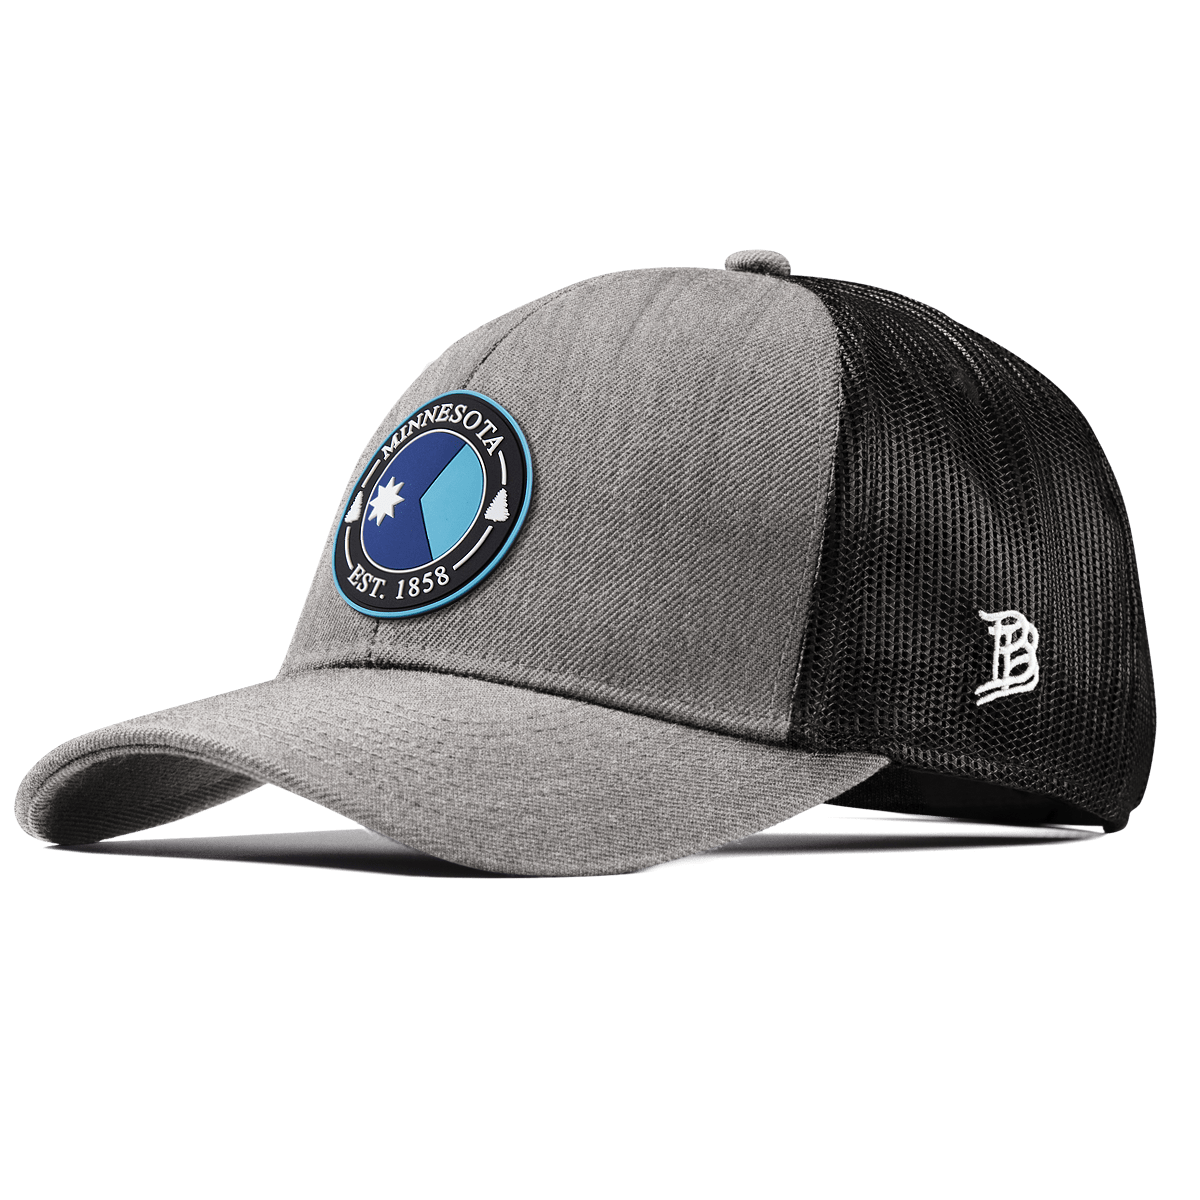 Minnesota Compass Fitted Heather